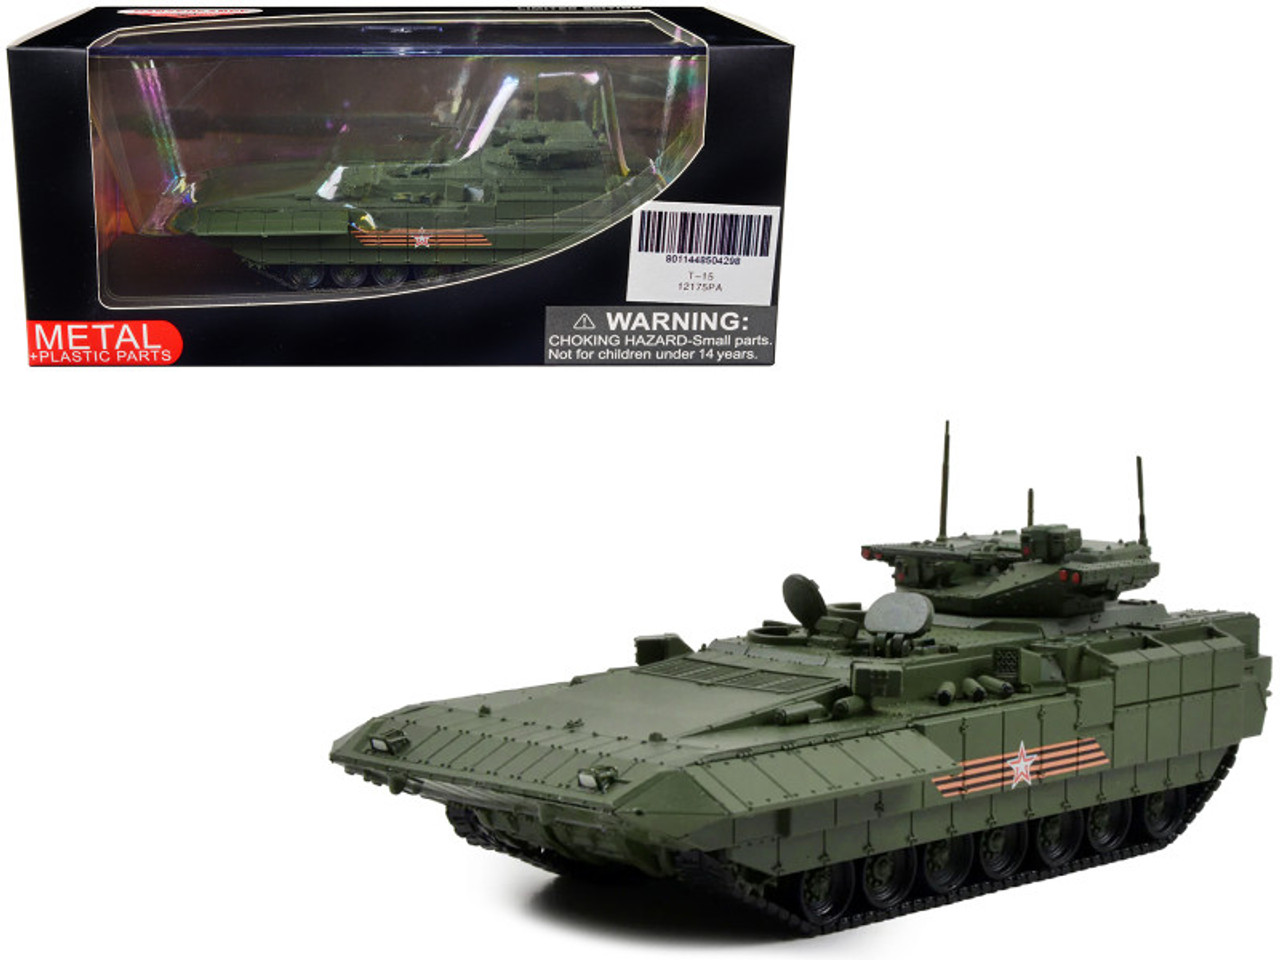 Russian T-15 Armata Heavy Infantry Fighting Vehicle 2015 Moscow Victory Day Parade 1/72 Diecast Model by Panzerkampf